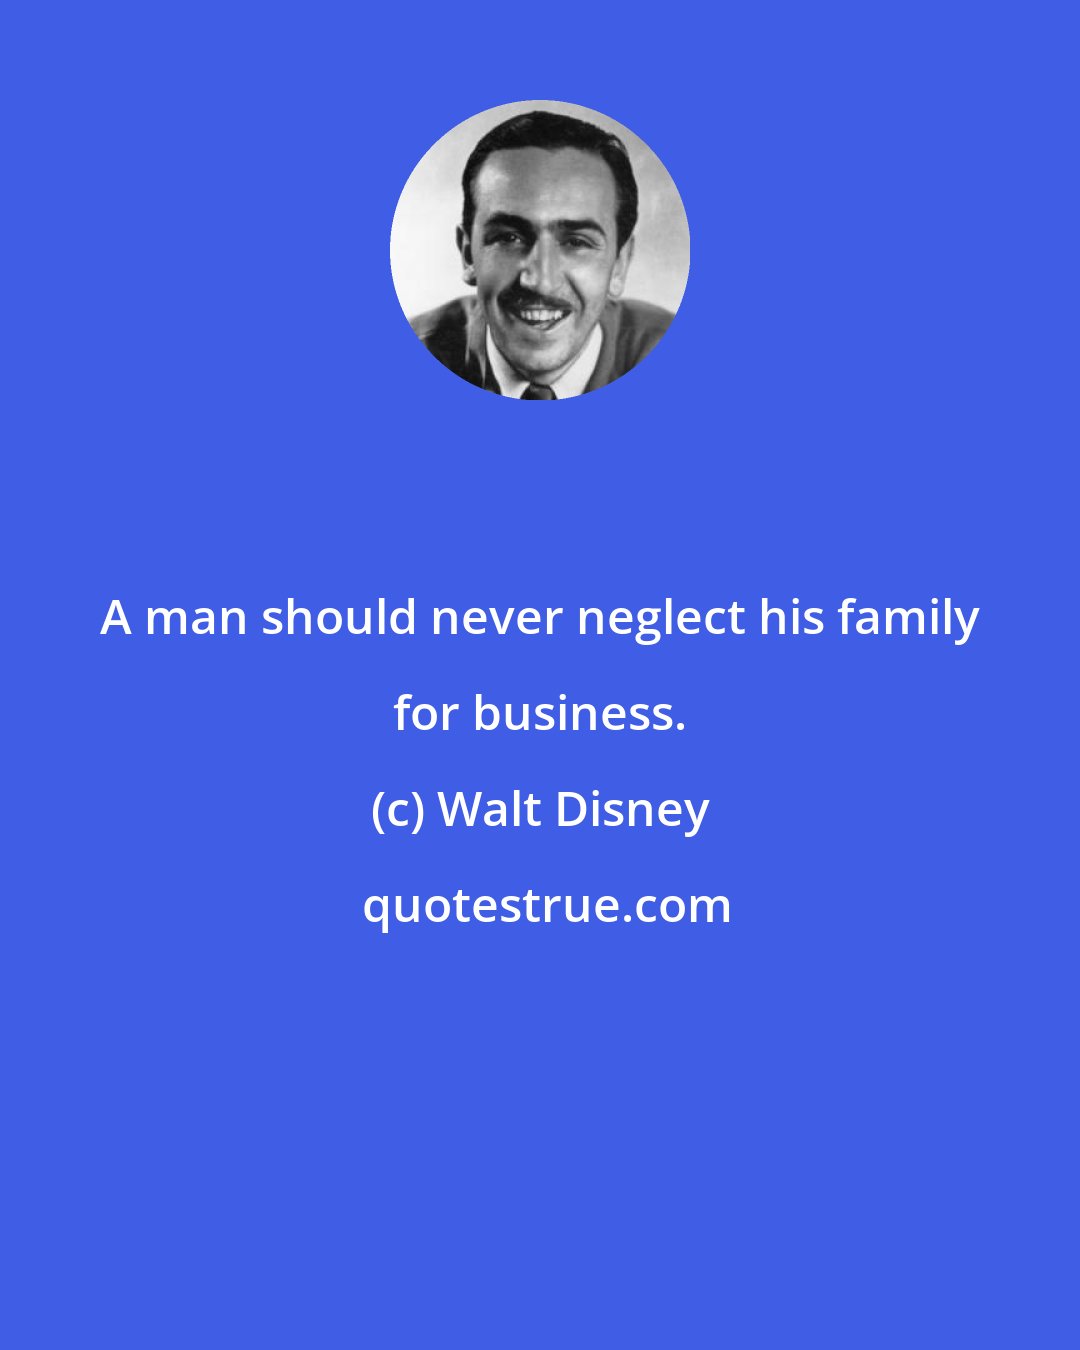 Walt Disney: A man should never neglect his family for business.